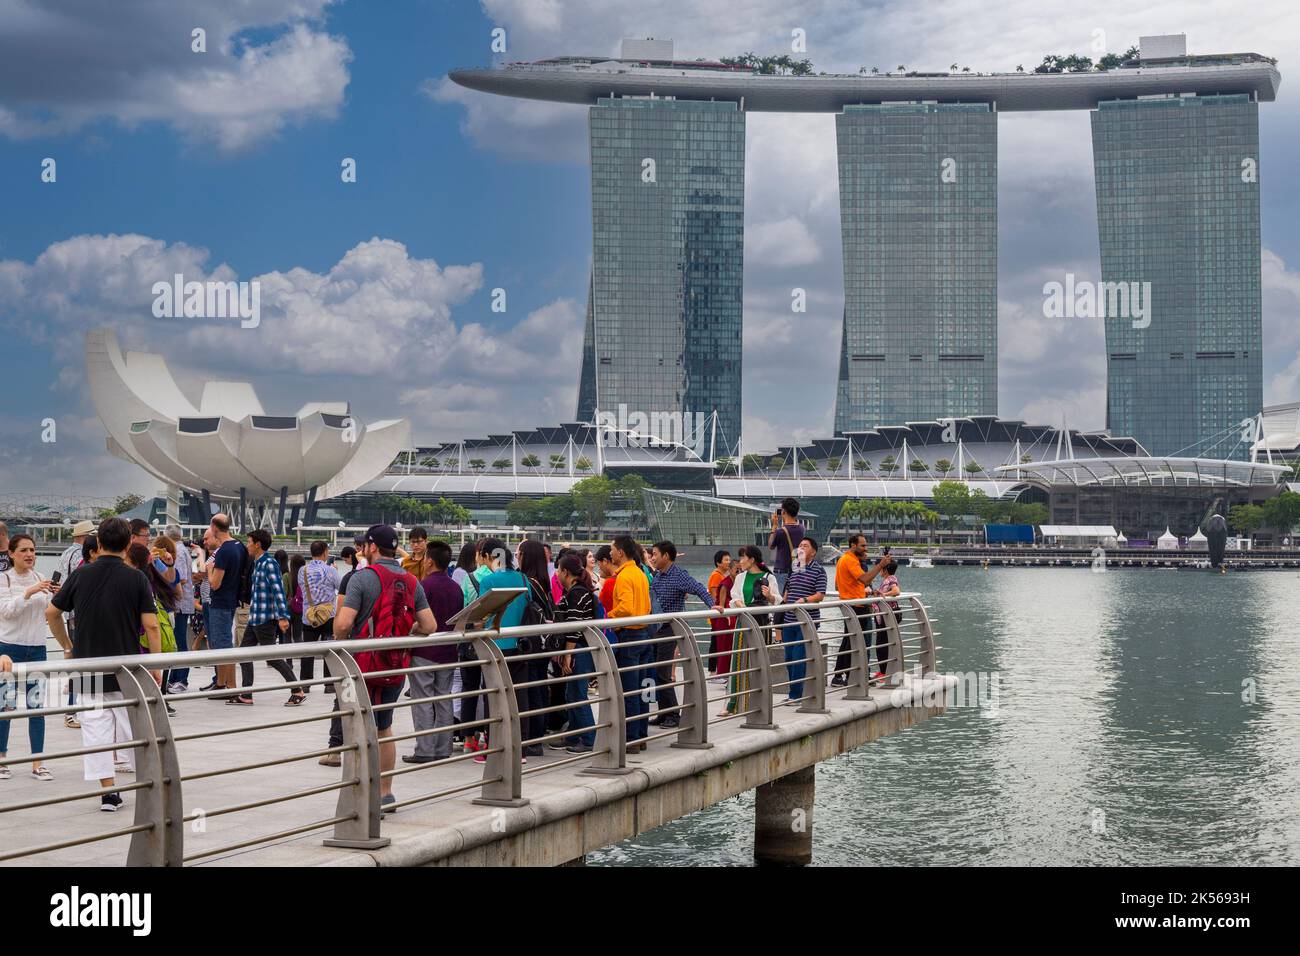 Marina Bay Sands, ArtScience Museum far left, Tourists on Viewing Platform in foreground.  Singapore. Stock Photo